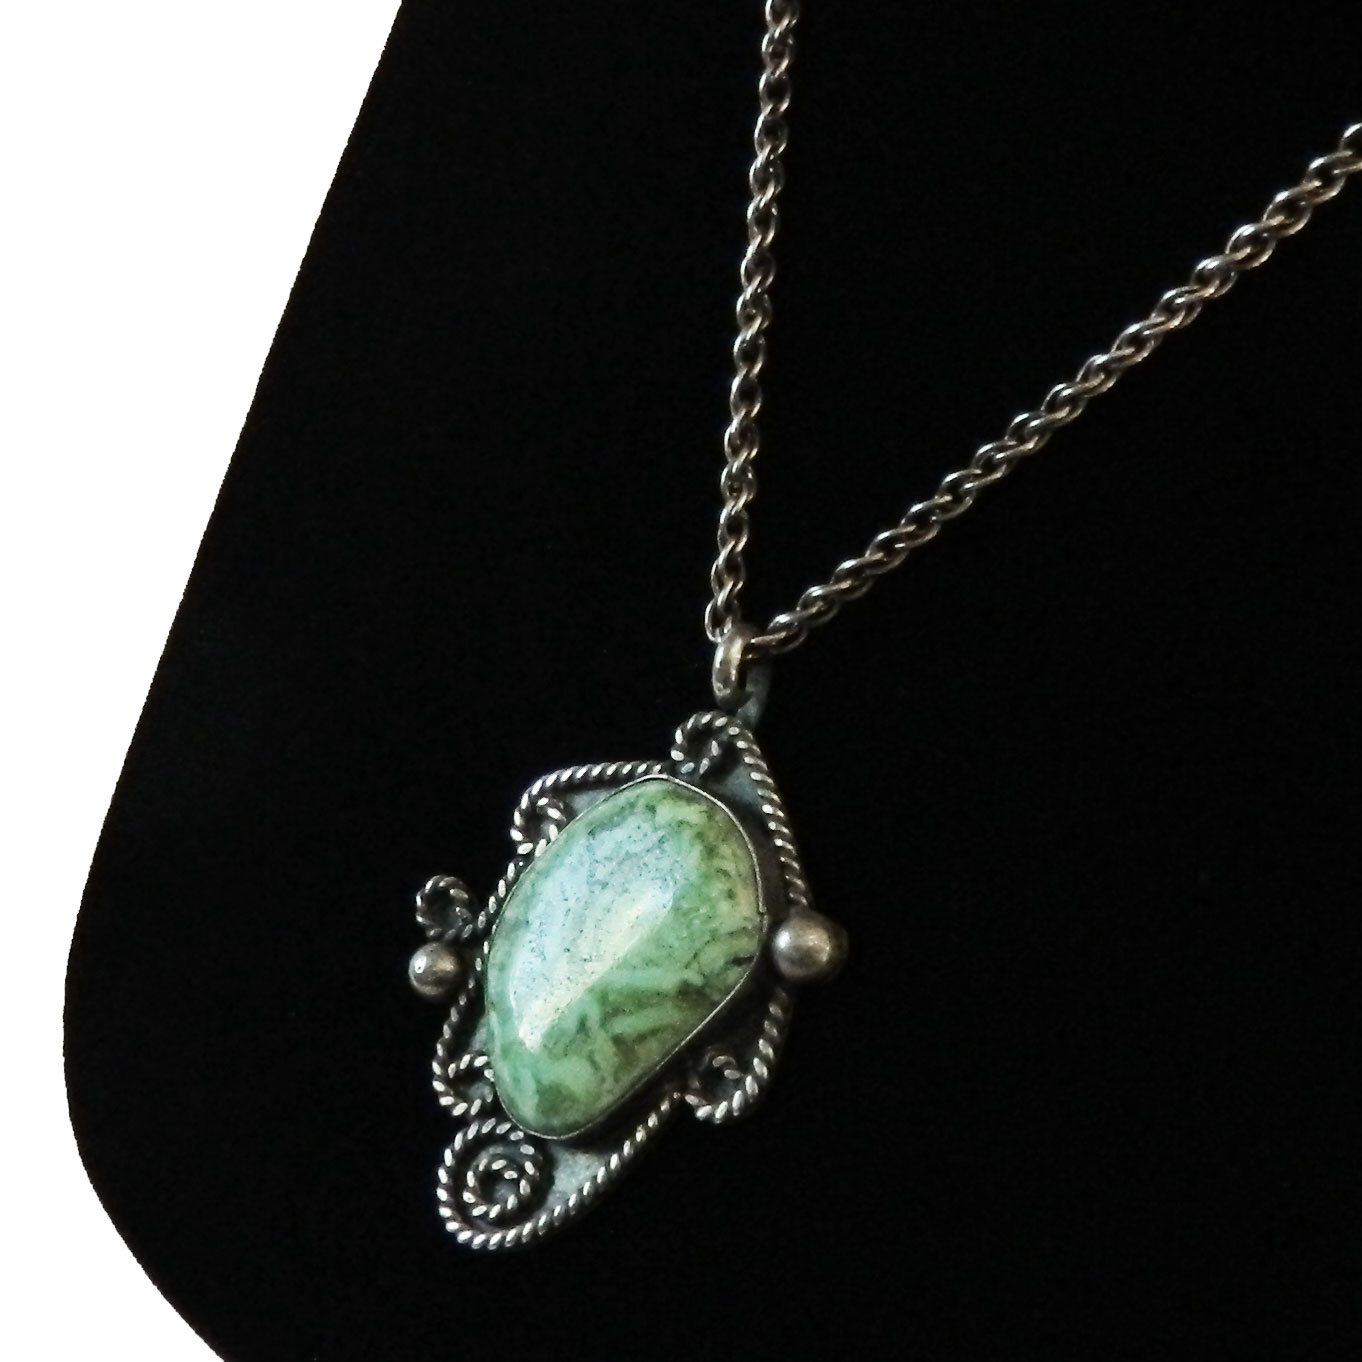 Green turquoise pendant necklace